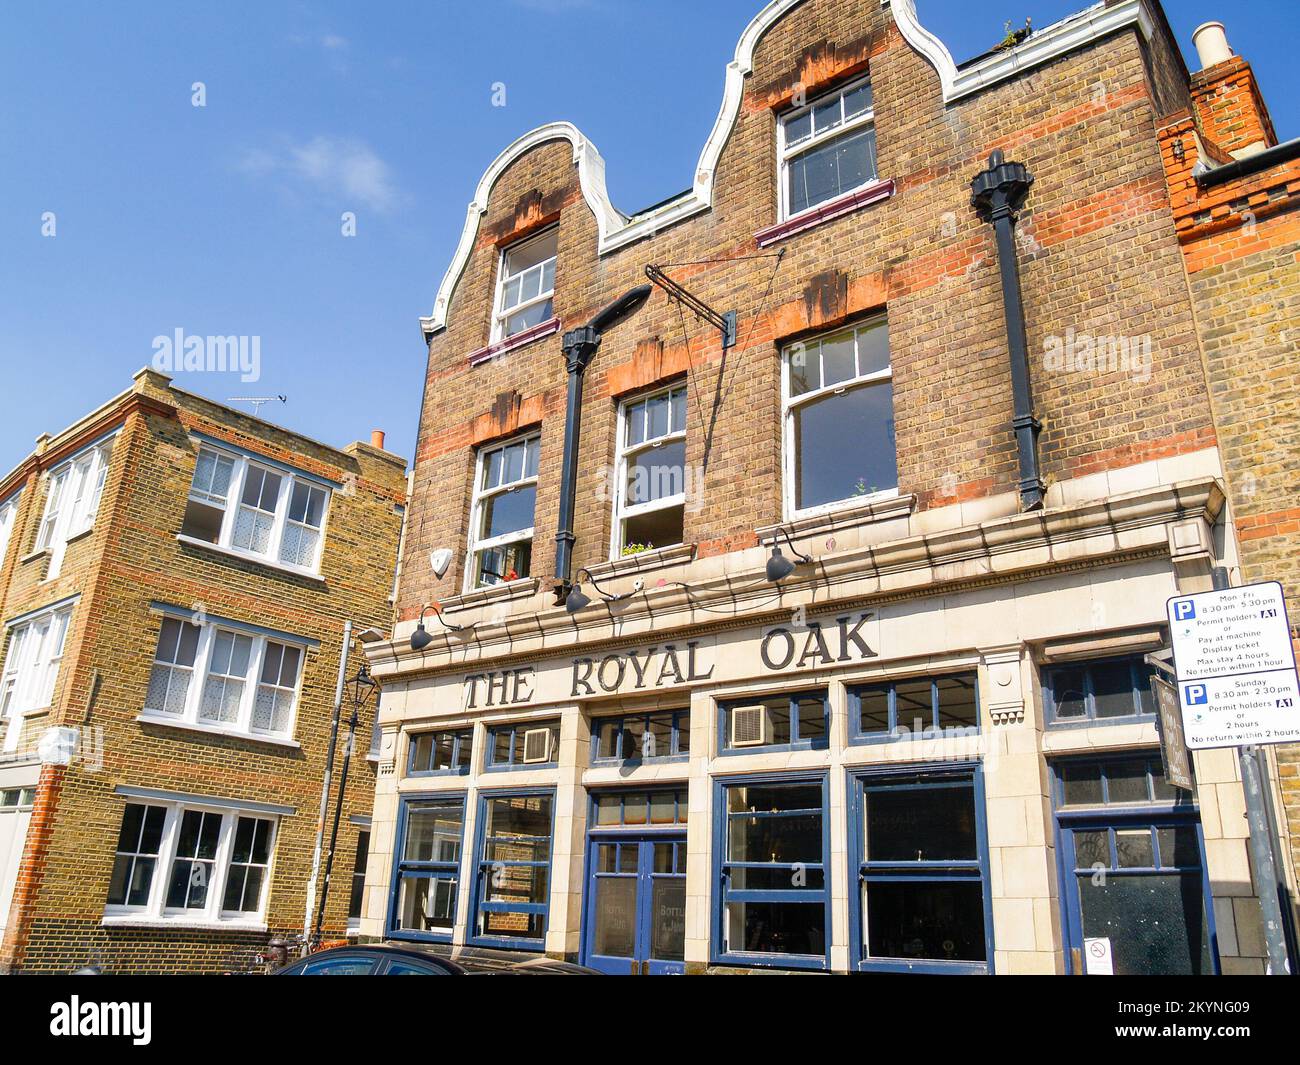 London England - July 4 2009; Royal Oak Pub frontage and gable from street. Stock Photo